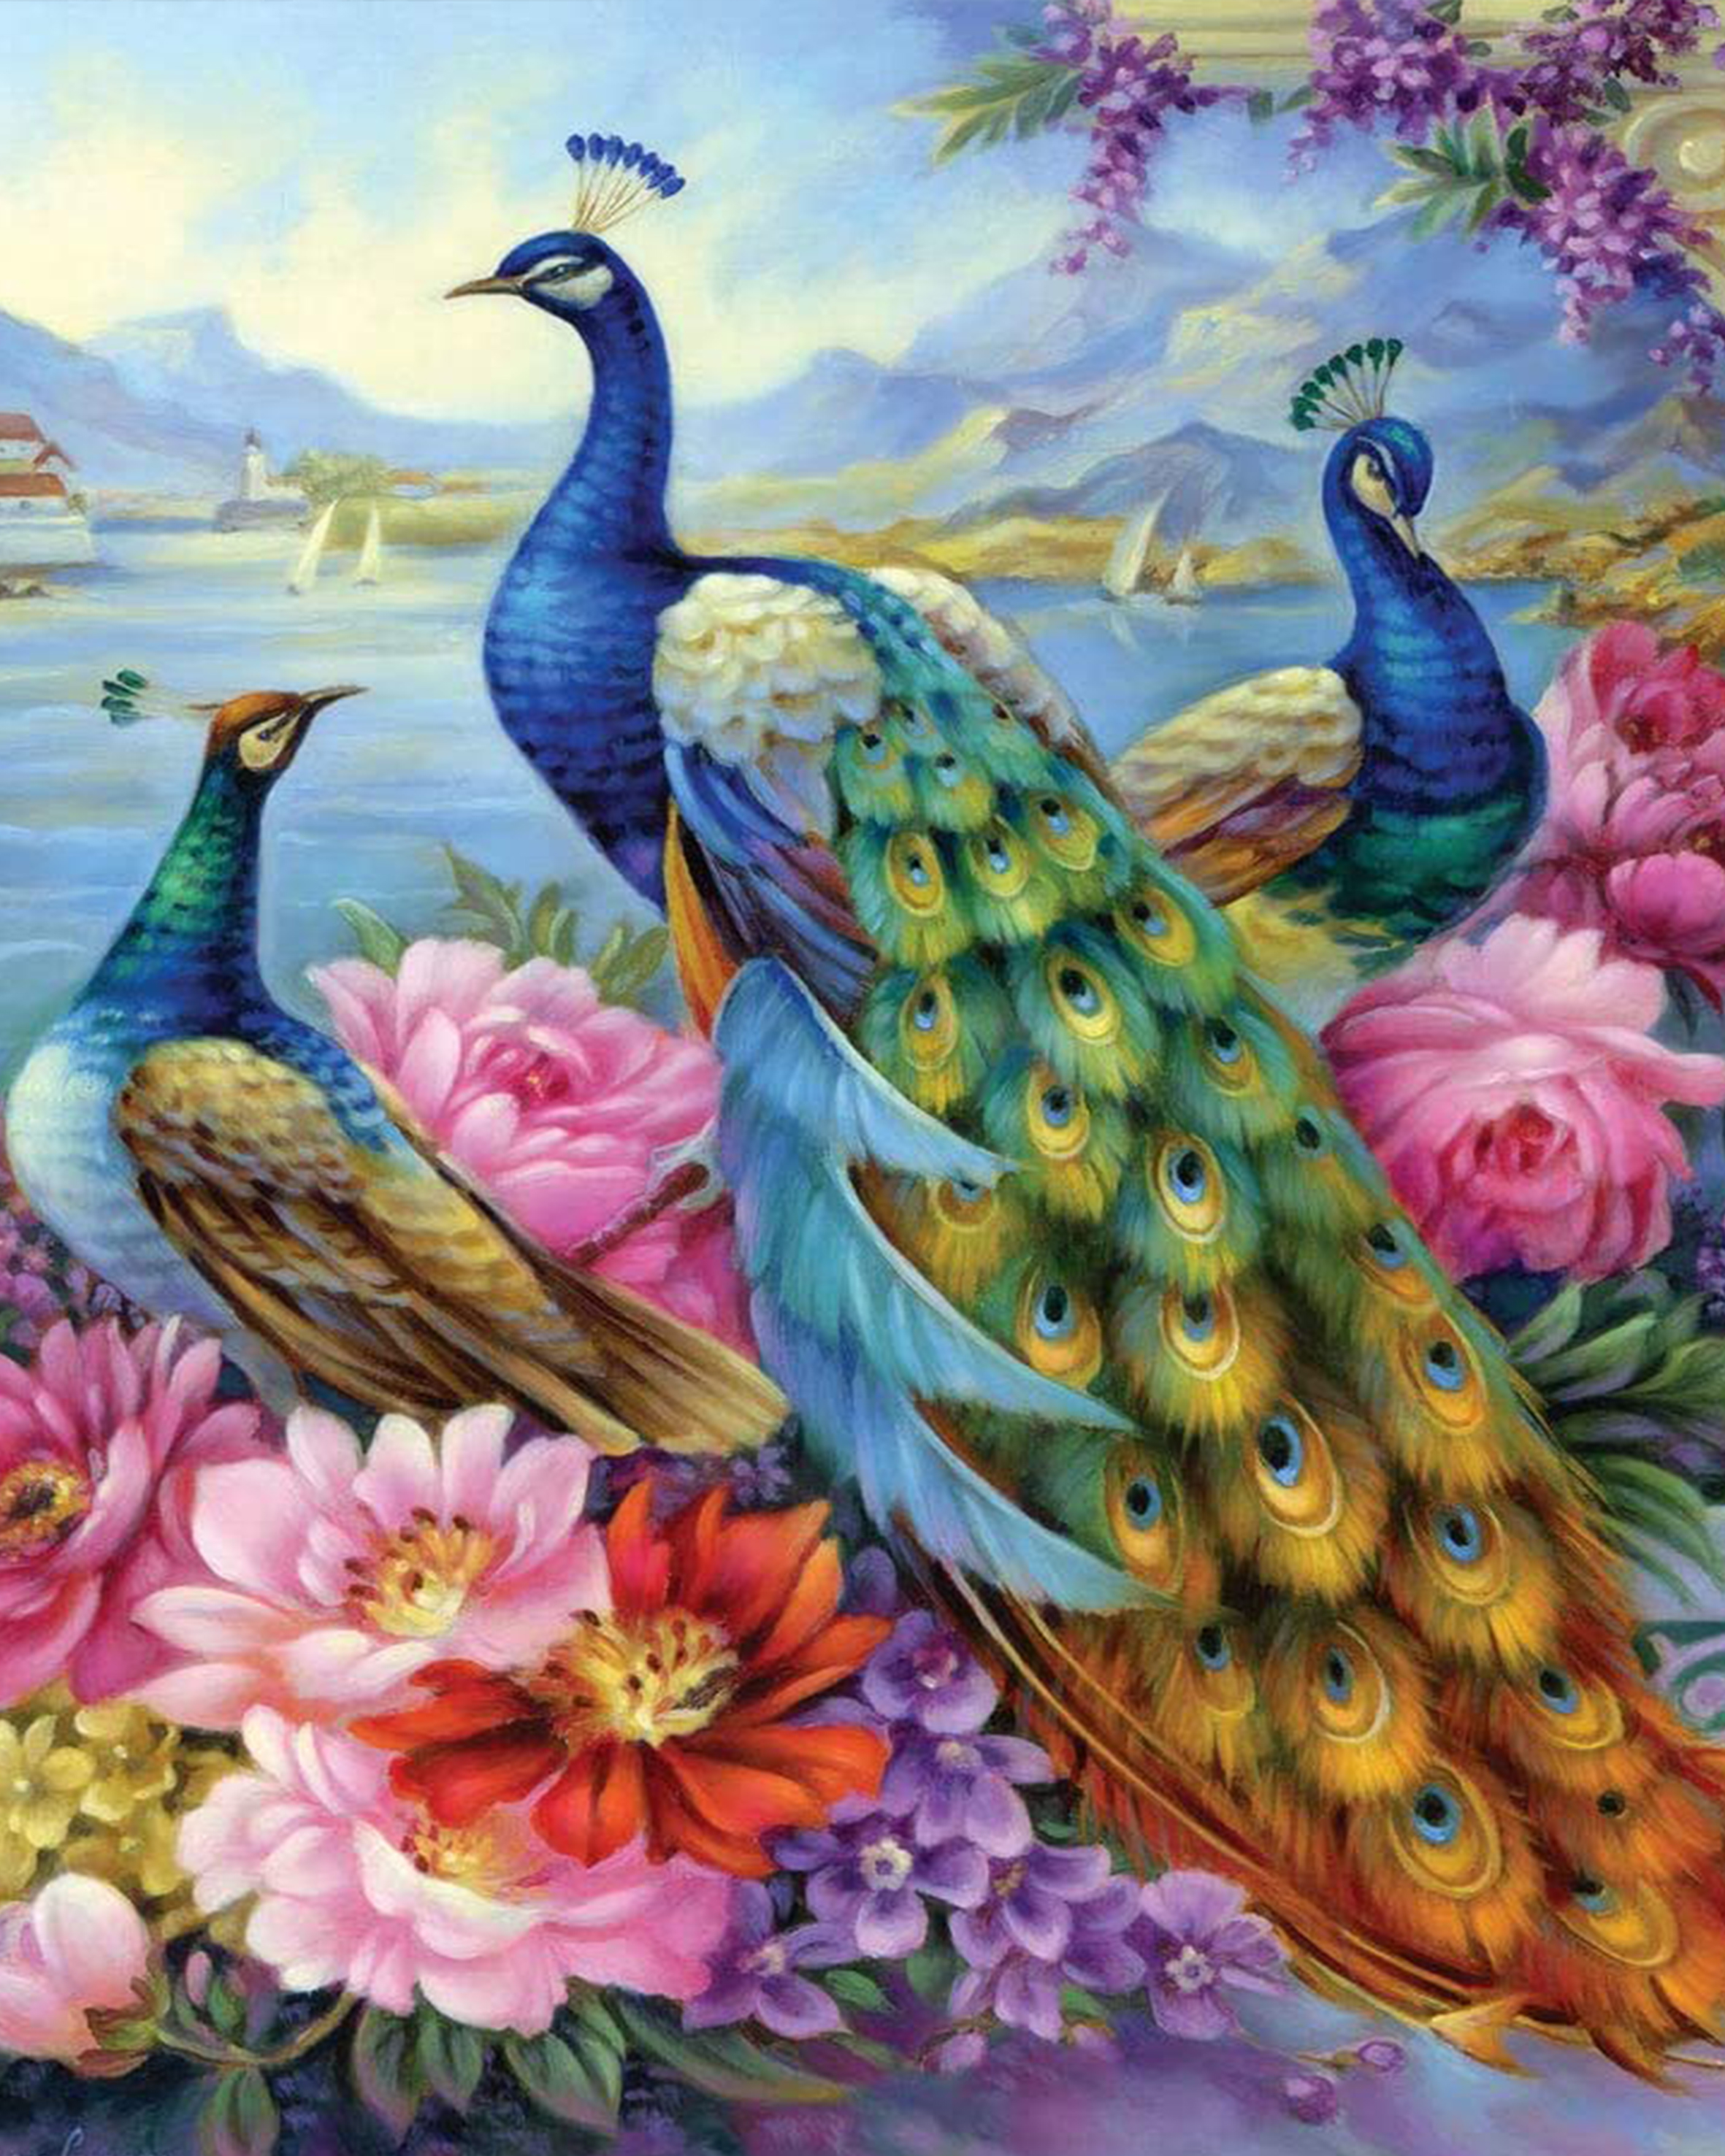 Paint by Numbers for Adults Beginner - TISHIRON Peacocks Adult Paint by  Number Kits with 3 Brushes & Bright Colors, 16x20 inches (Frameless) 